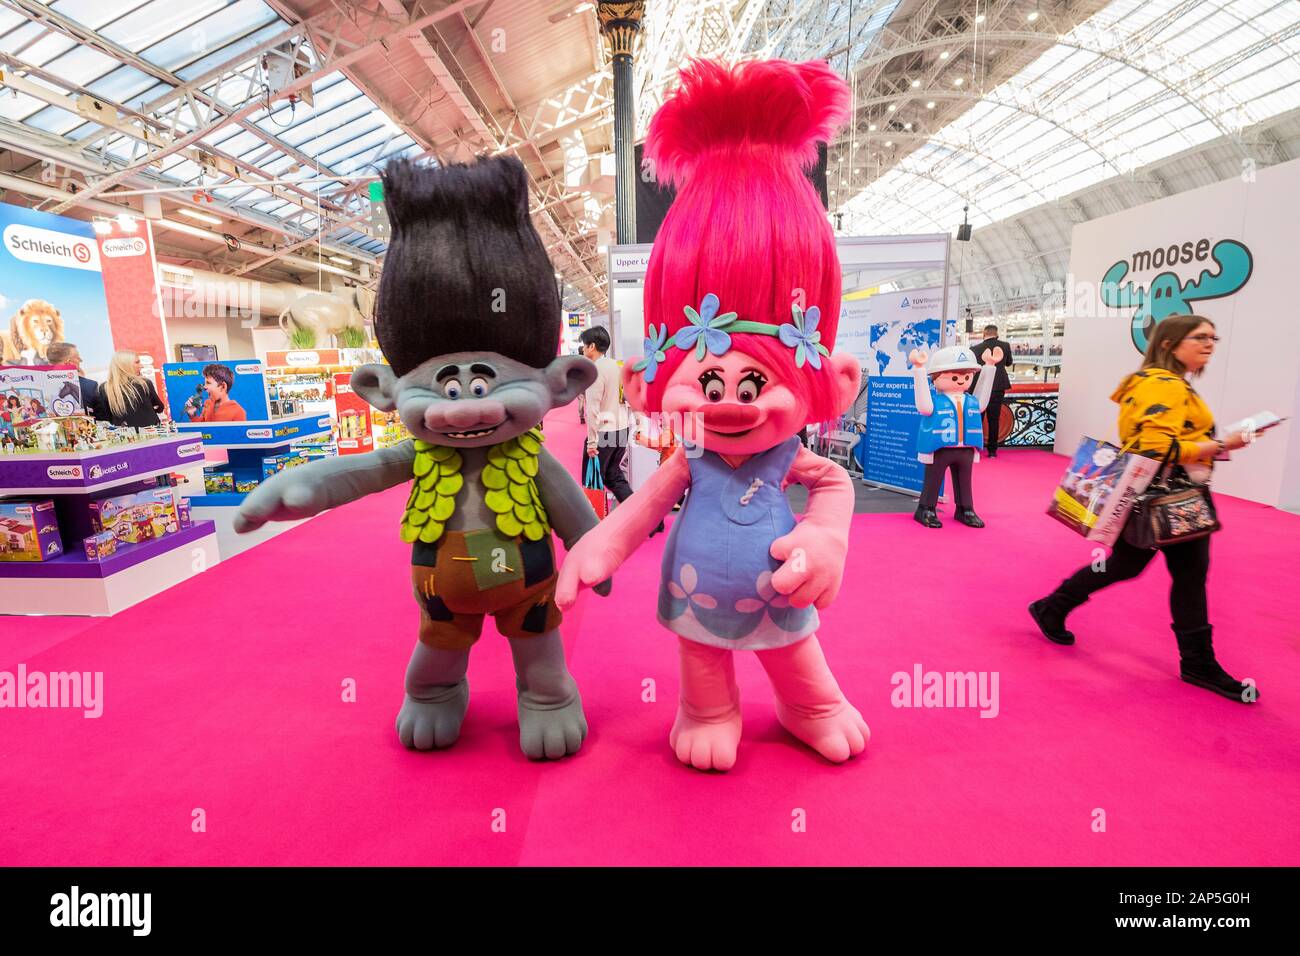 London, UK. 21st Jan 2020. Poppy and Branch from a new series, The Trolls - The Toy fair opens at London's Olympia exhibition centre, organised by the British Toy & Hobby Association. Credit: Guy Bell/Alamy Live News Stock Photo